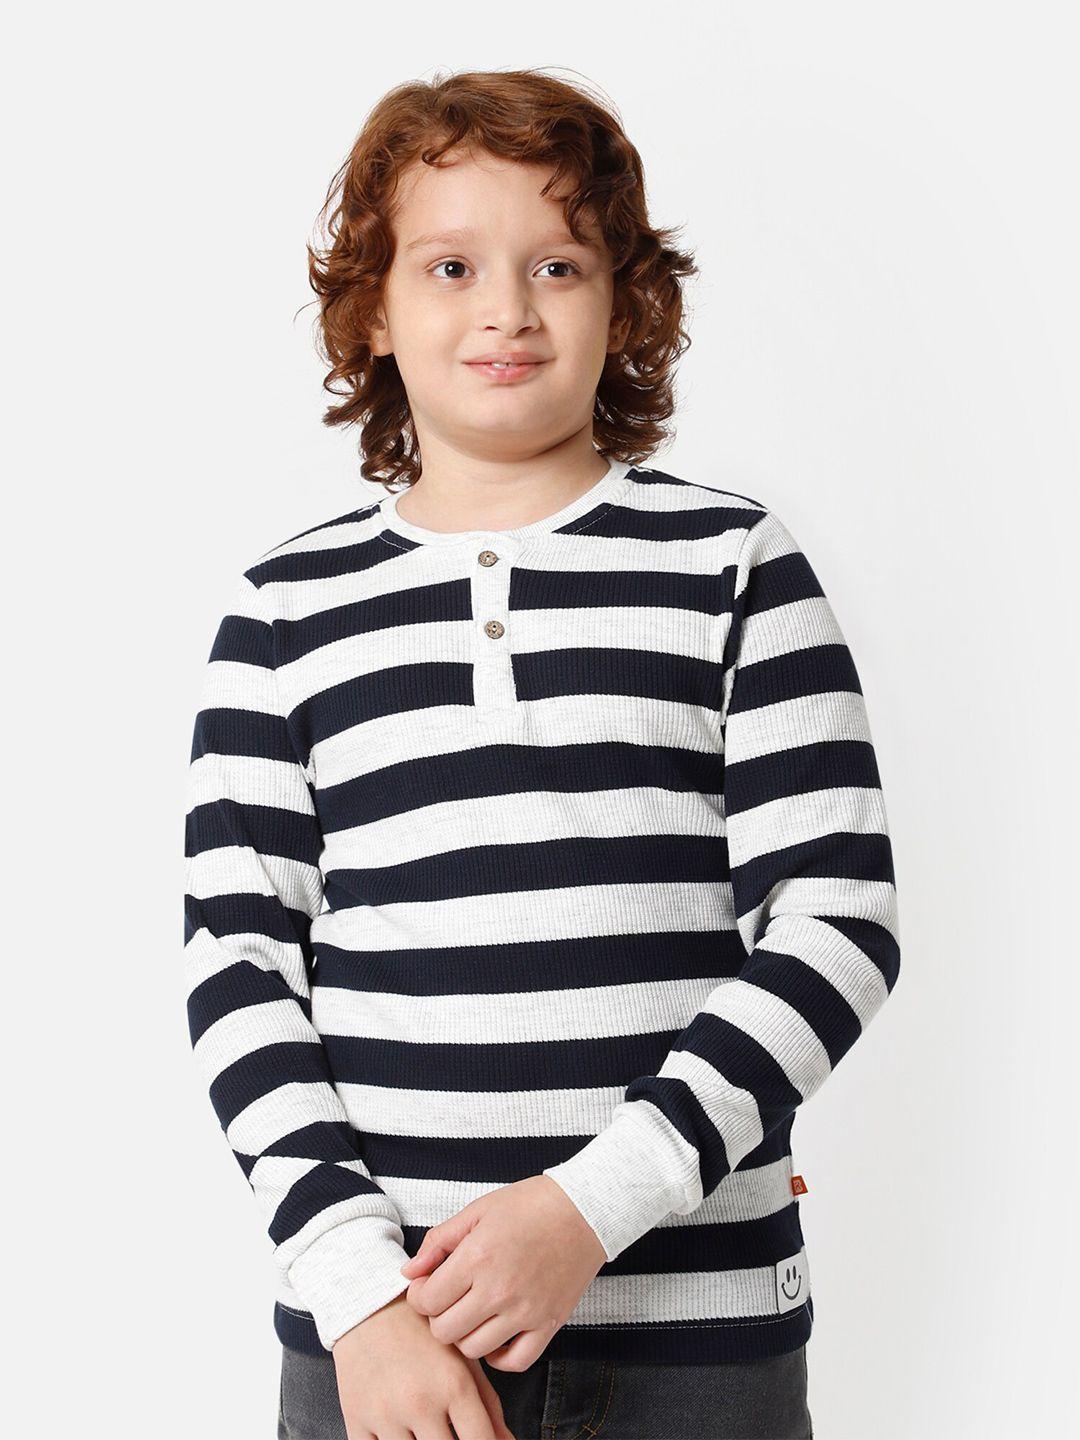 proteens boys navy blue & white striped henley neck t-shirt